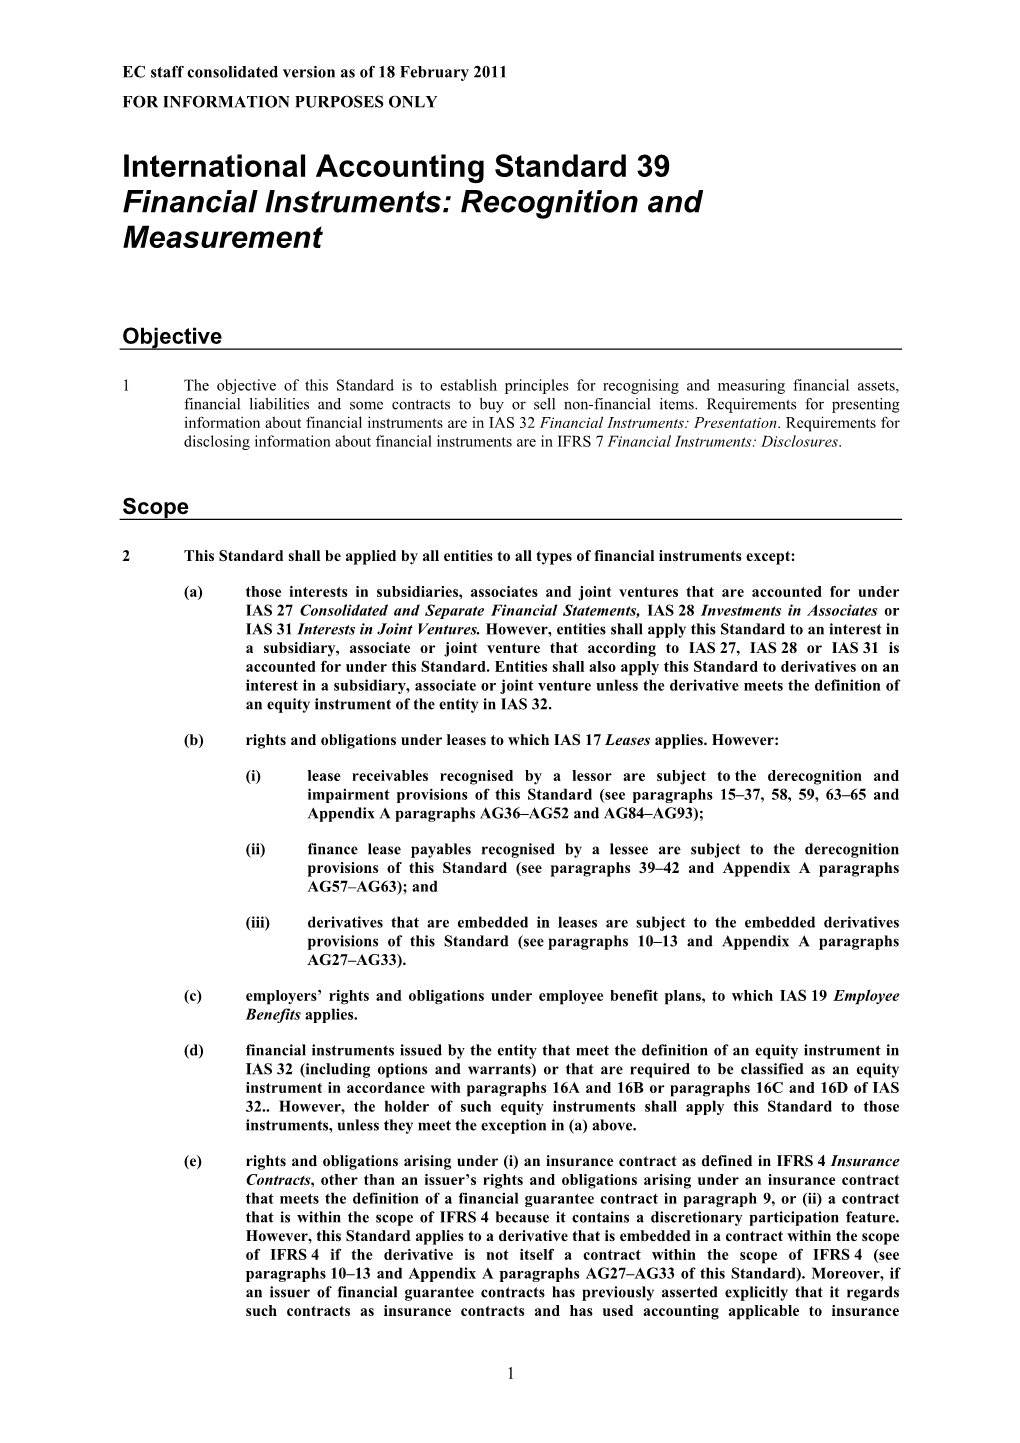 International Accounting Standard 39 Financial Instruments: Recognition and Measurement